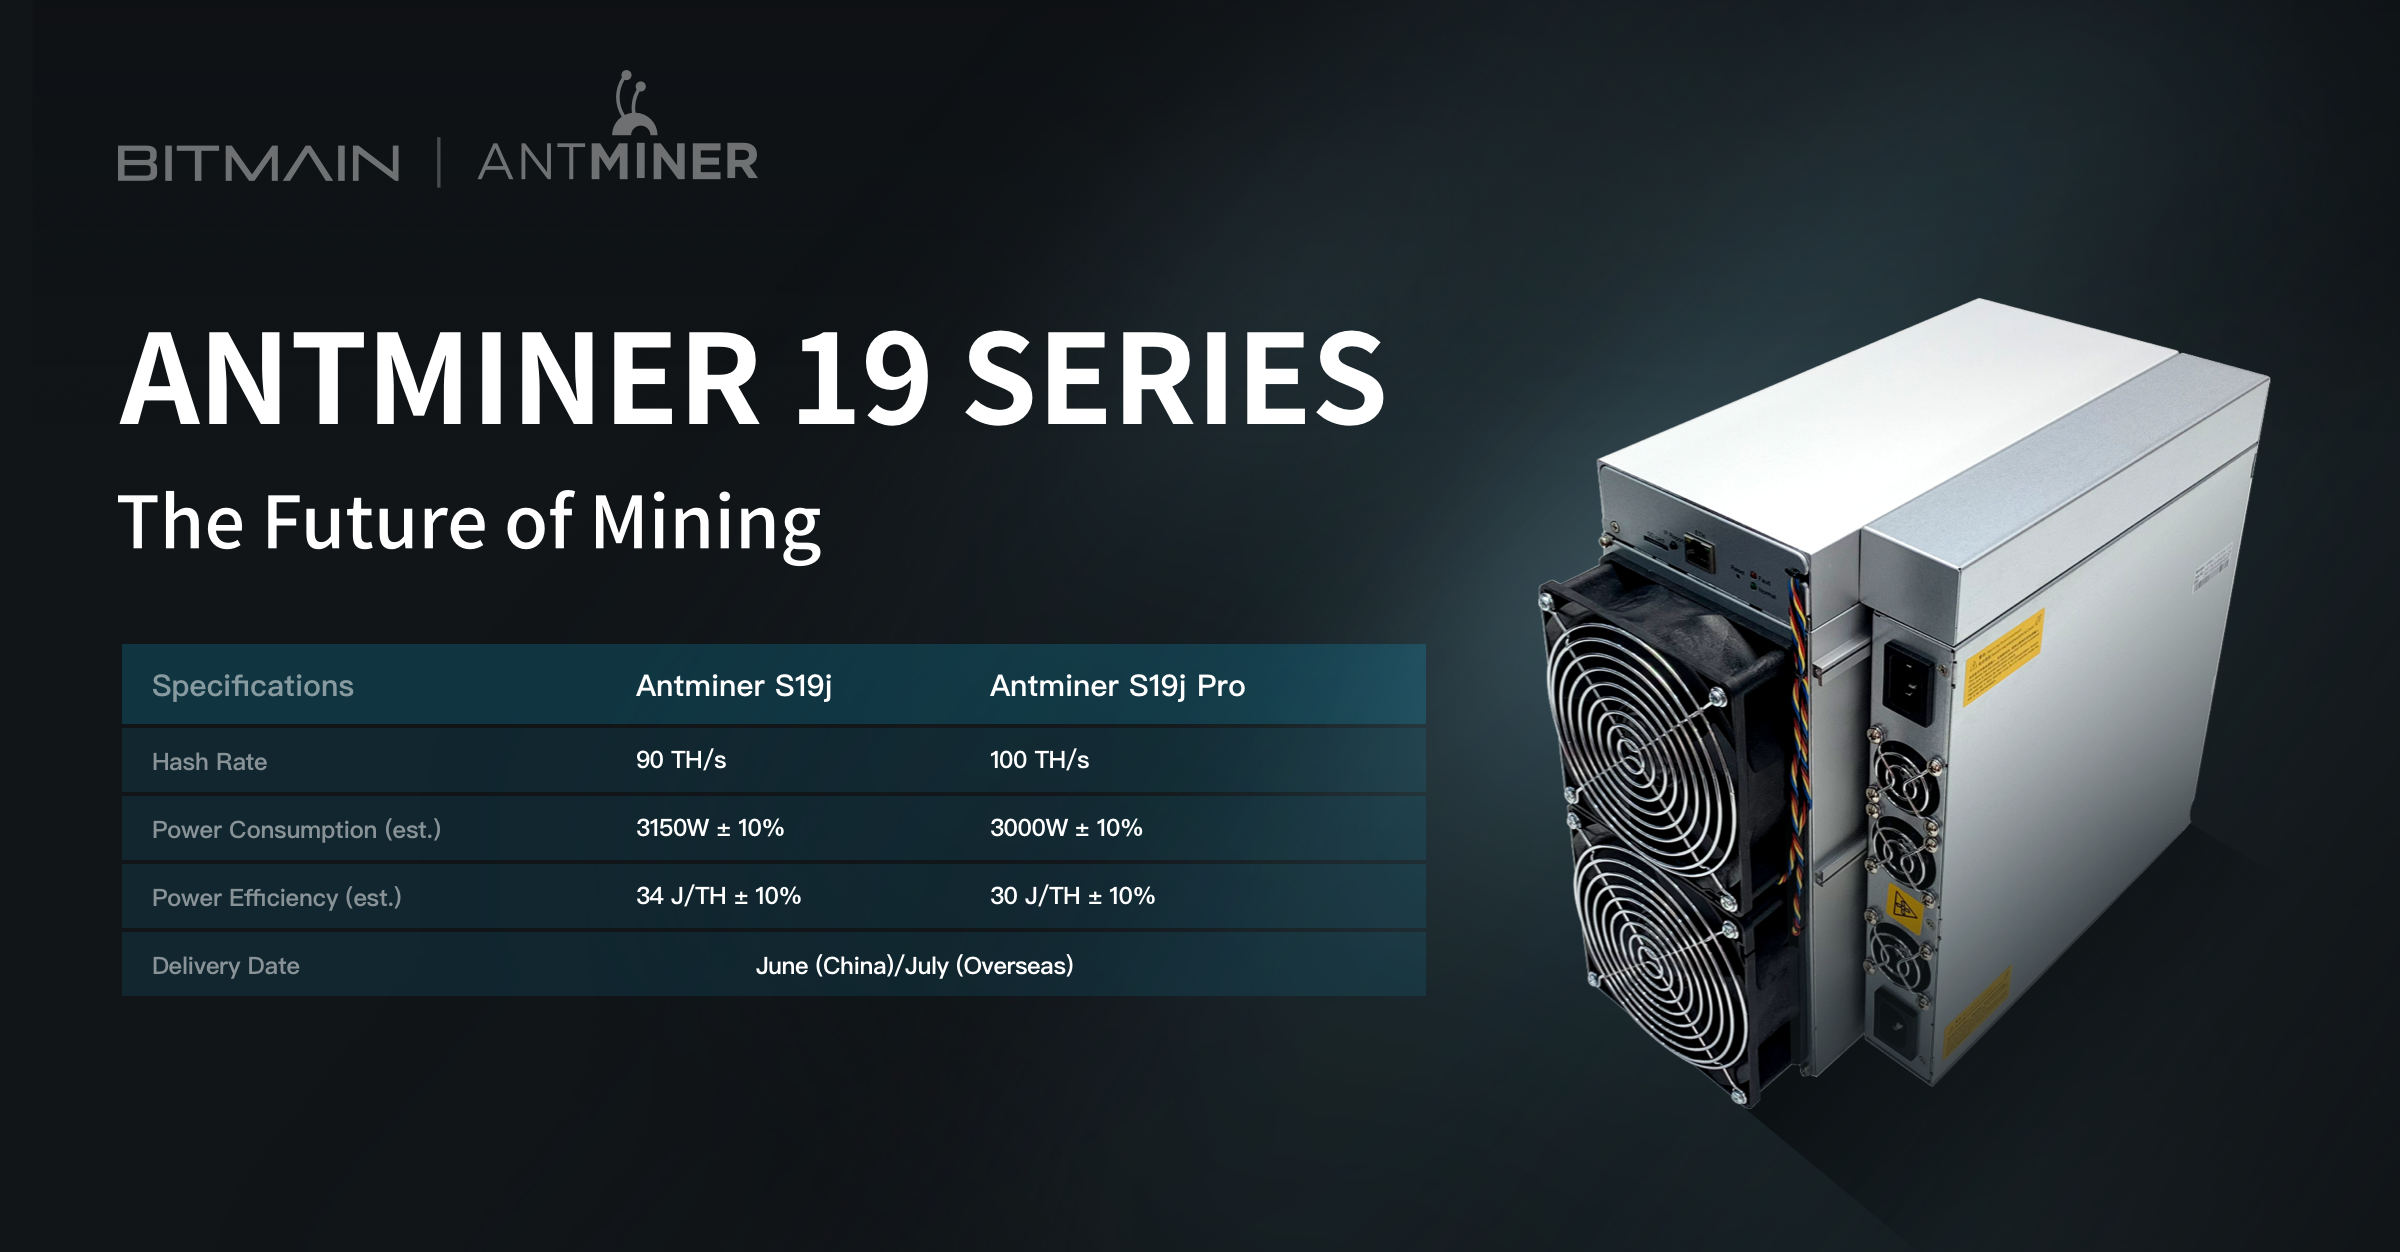 Asic s19 pro. Antminer s19pro 110t. Bitmain Antminer s19 Pro 110th/s. ASIC Bitmain Antminer s19 Pro. Antminer s19 габариты.